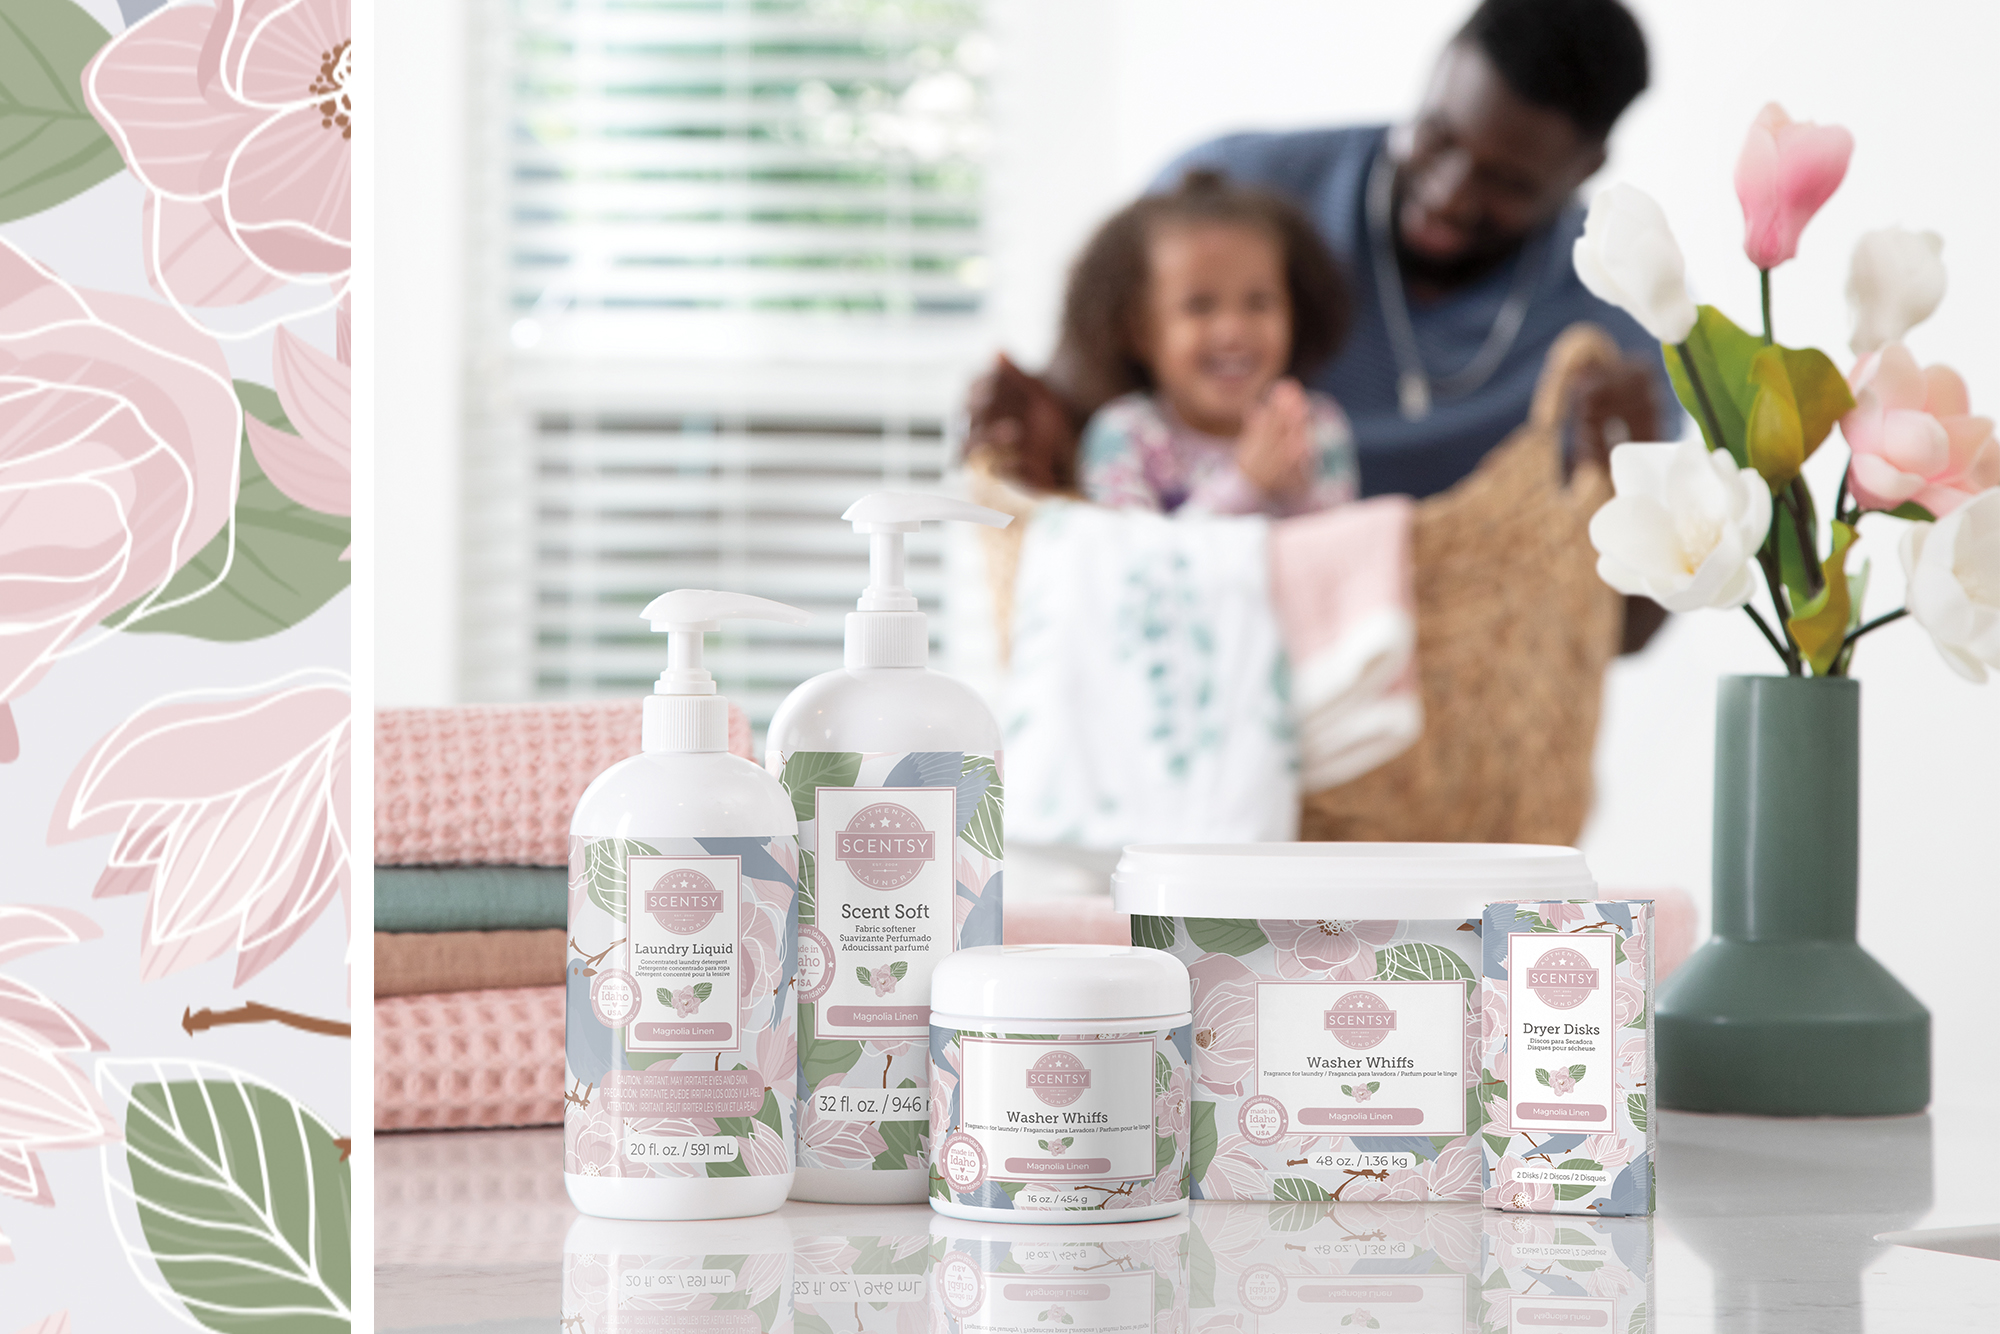 Scentsy Magnolia Linen Laundry Products in a stylized shot with people in the background